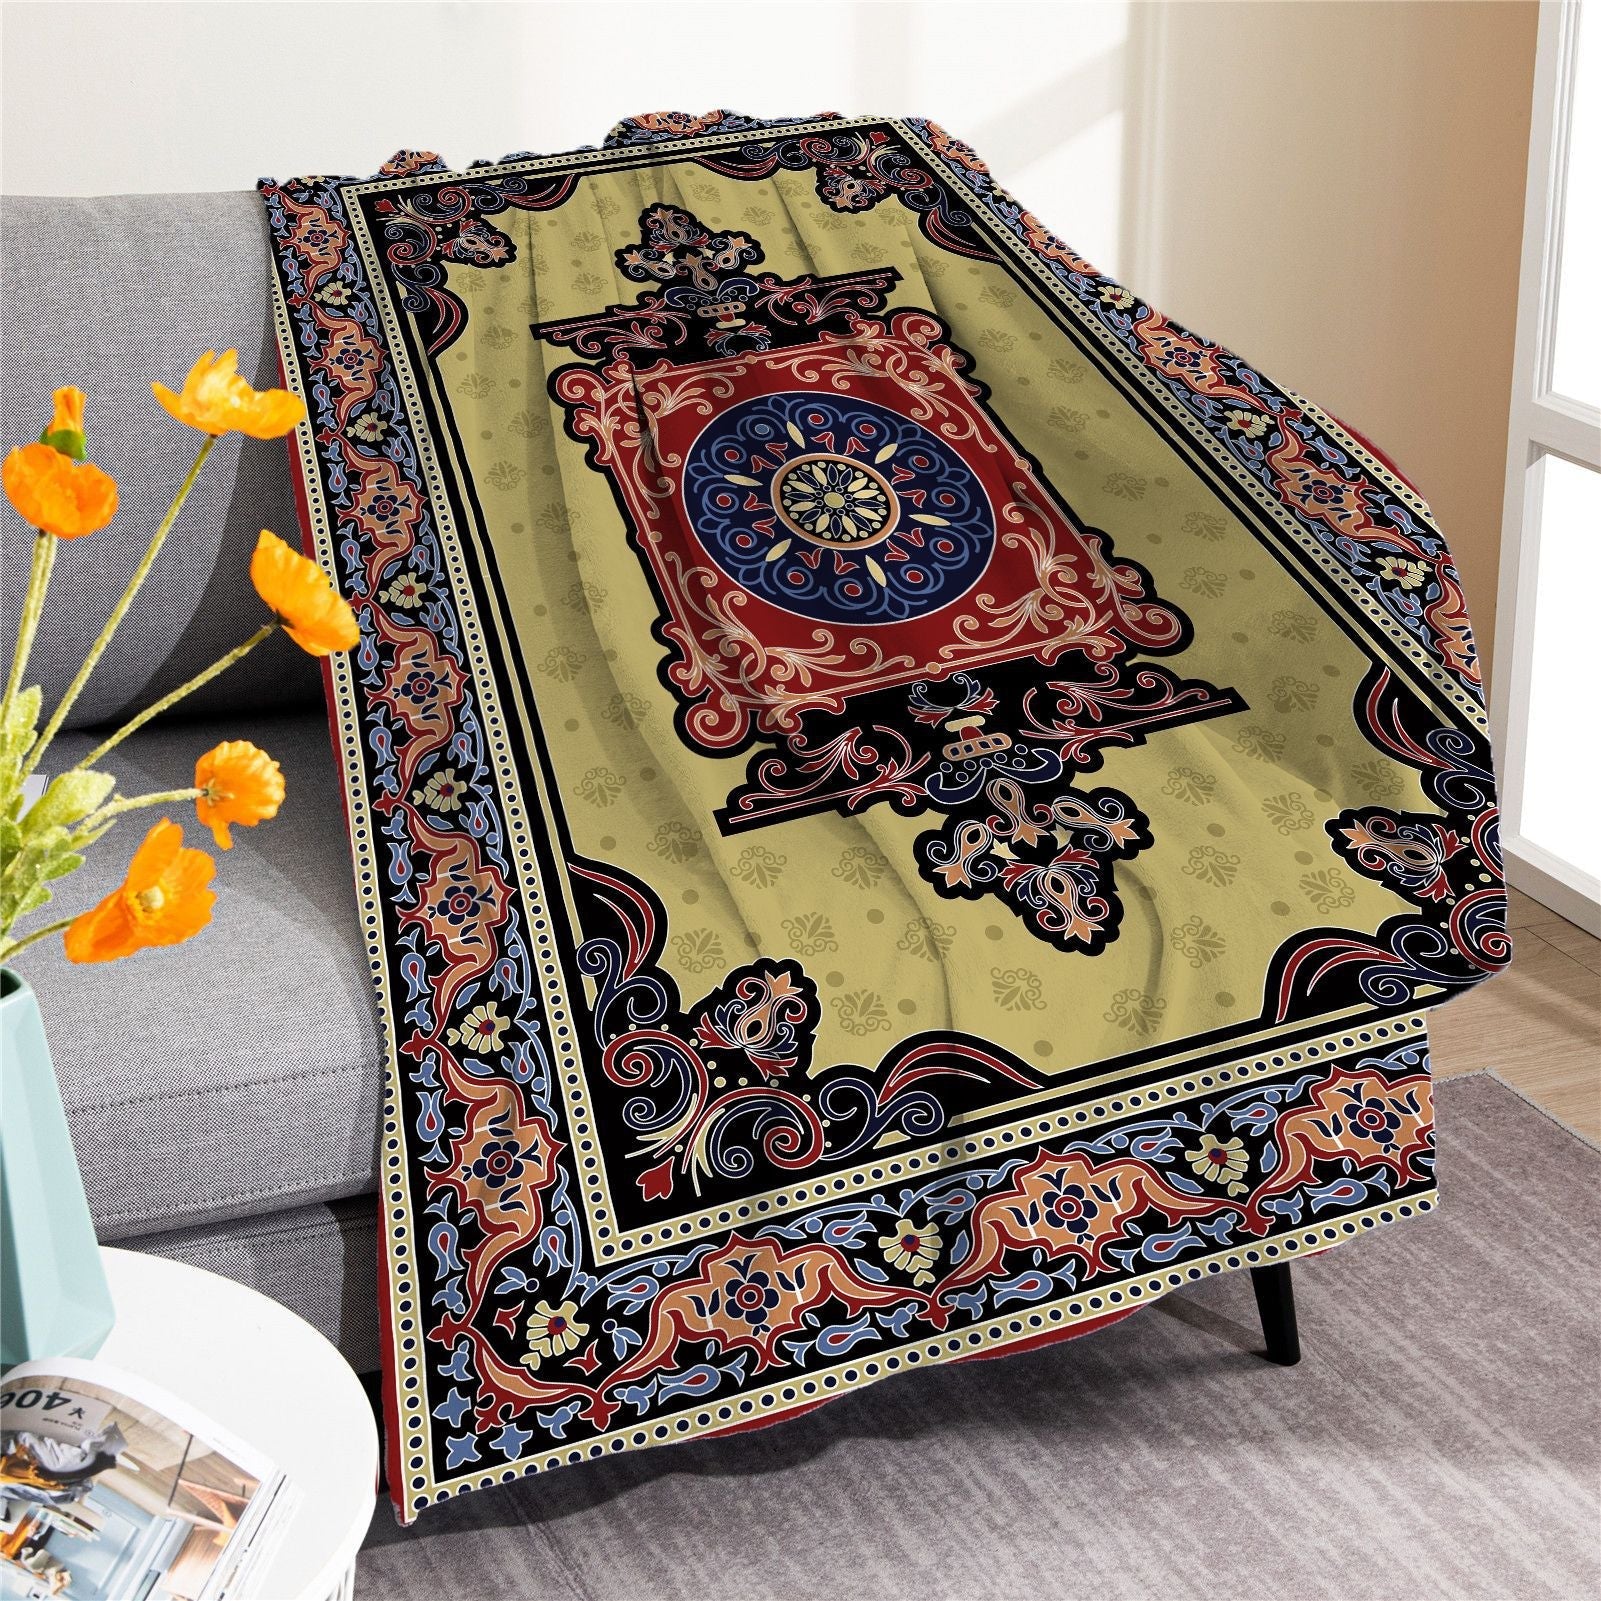 Vintage Boho Fleece Throw Blankets-Blankets-M20220701-4-50*60 Inches-Free Shipping at meselling99